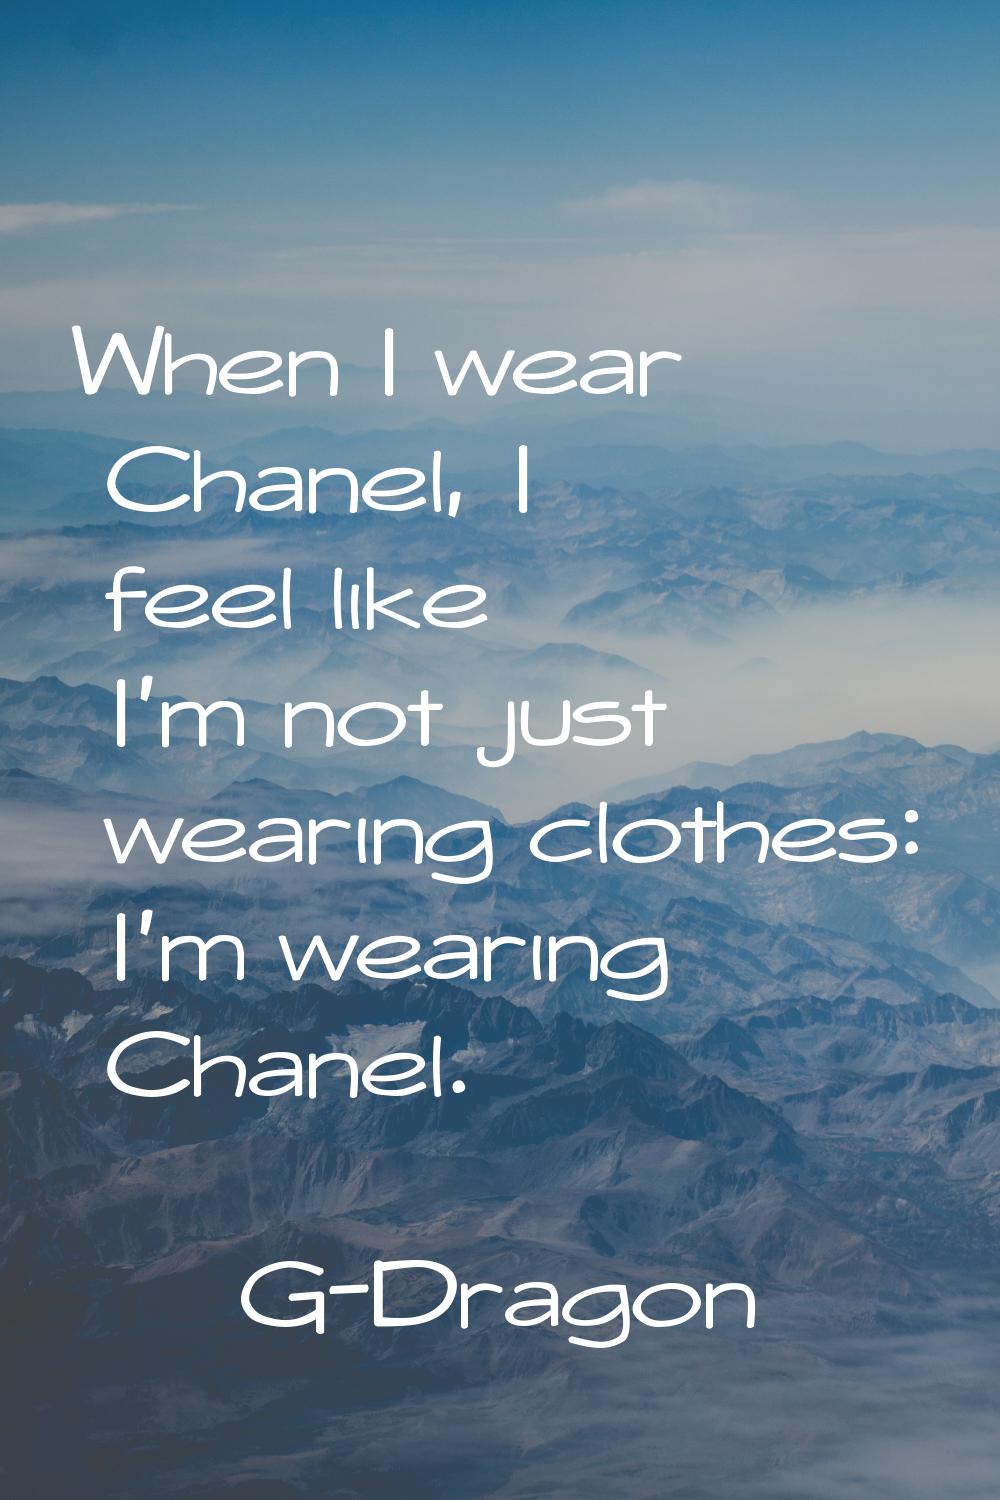 When I wear Chanel, I feel like I'm not just wearing clothes: I'm wearing Chanel.